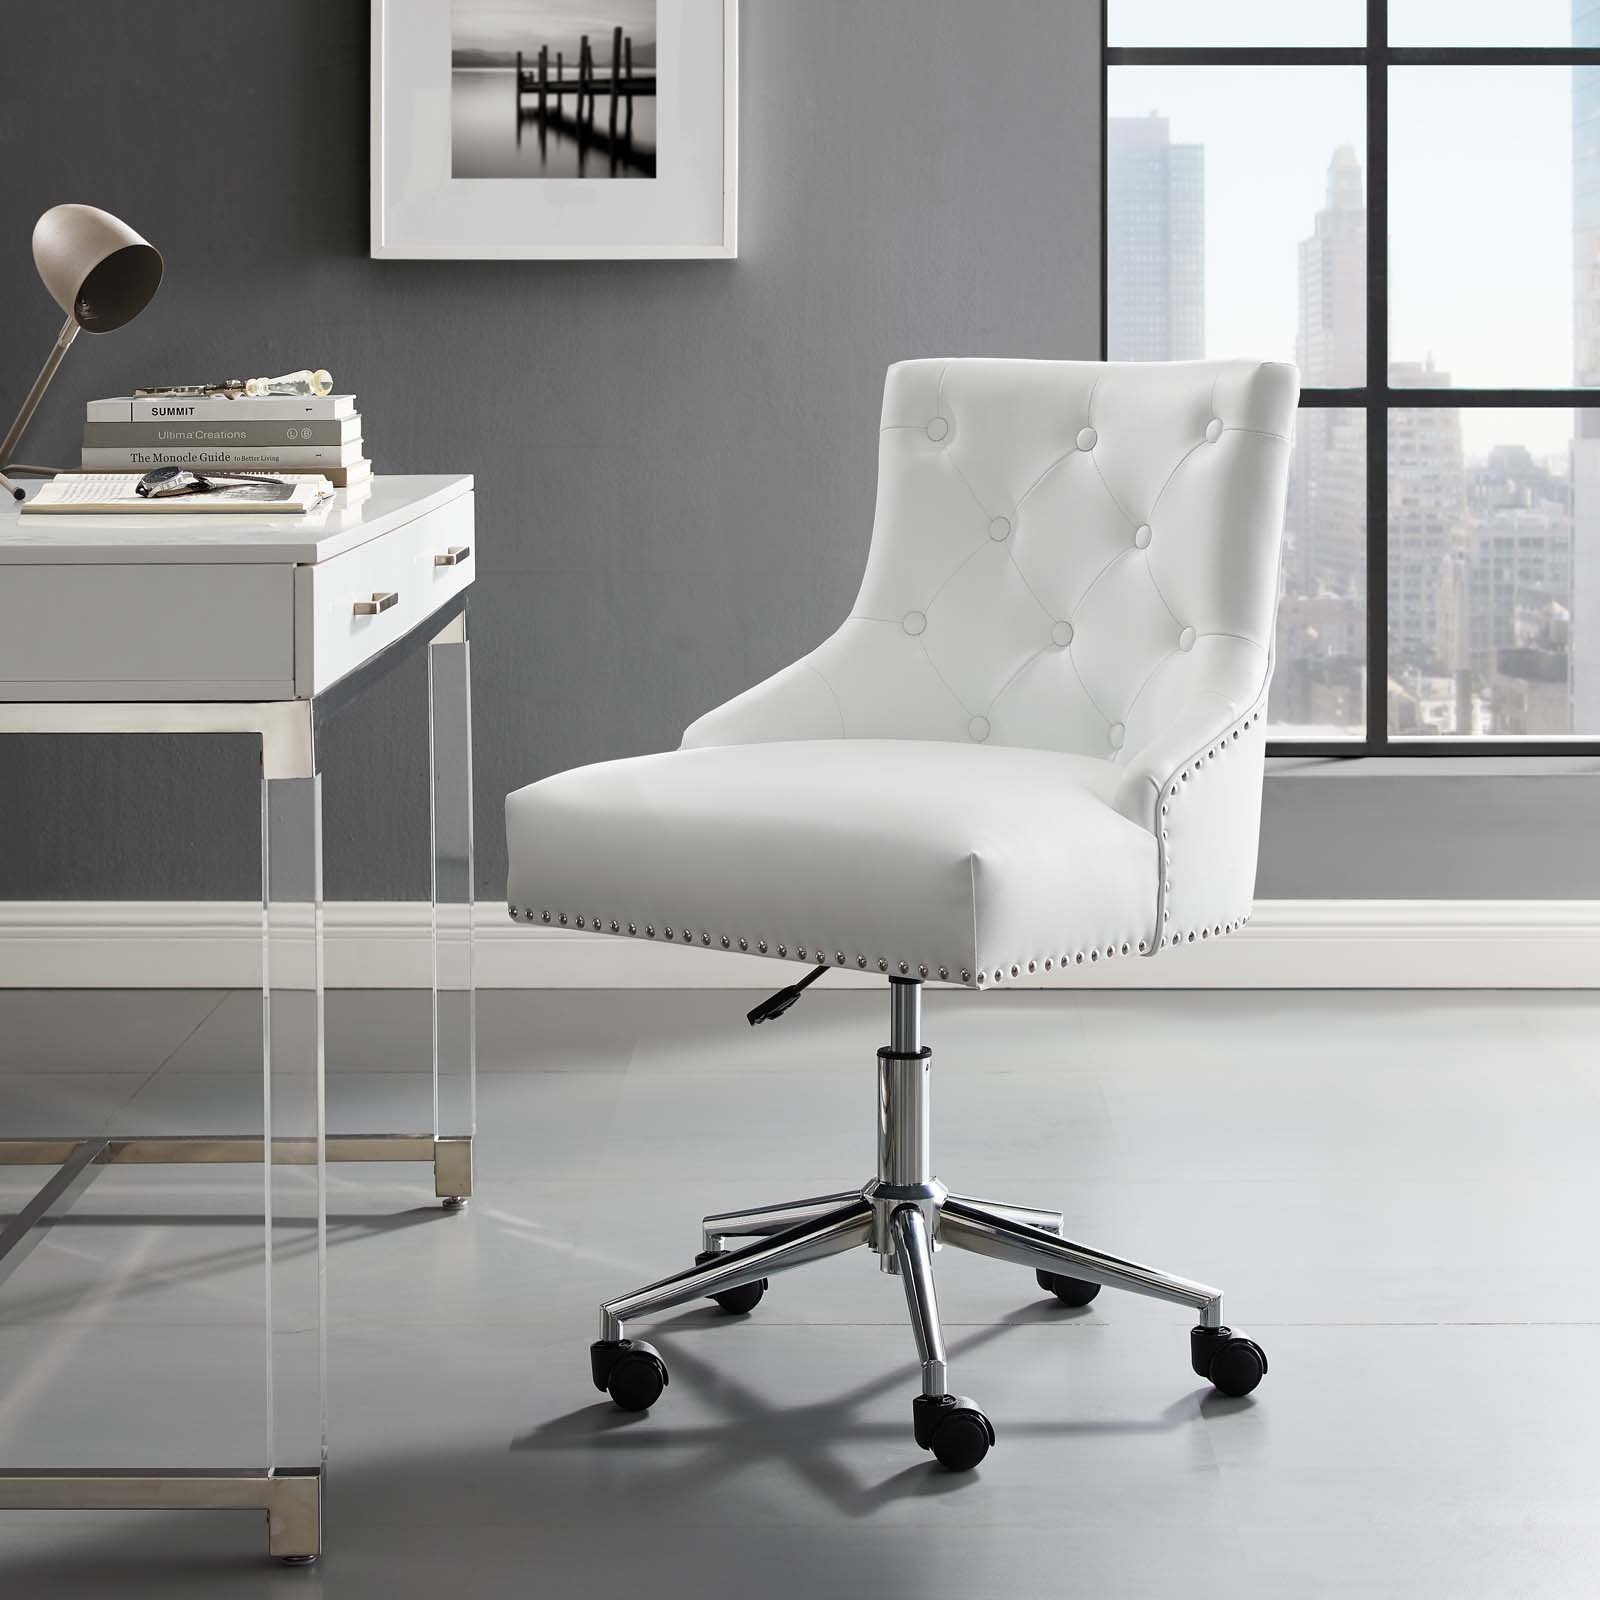 Regent White Tufted Button Swivel Faux Leather Office Chair Eei 3608 Whi Qb13206809 6 